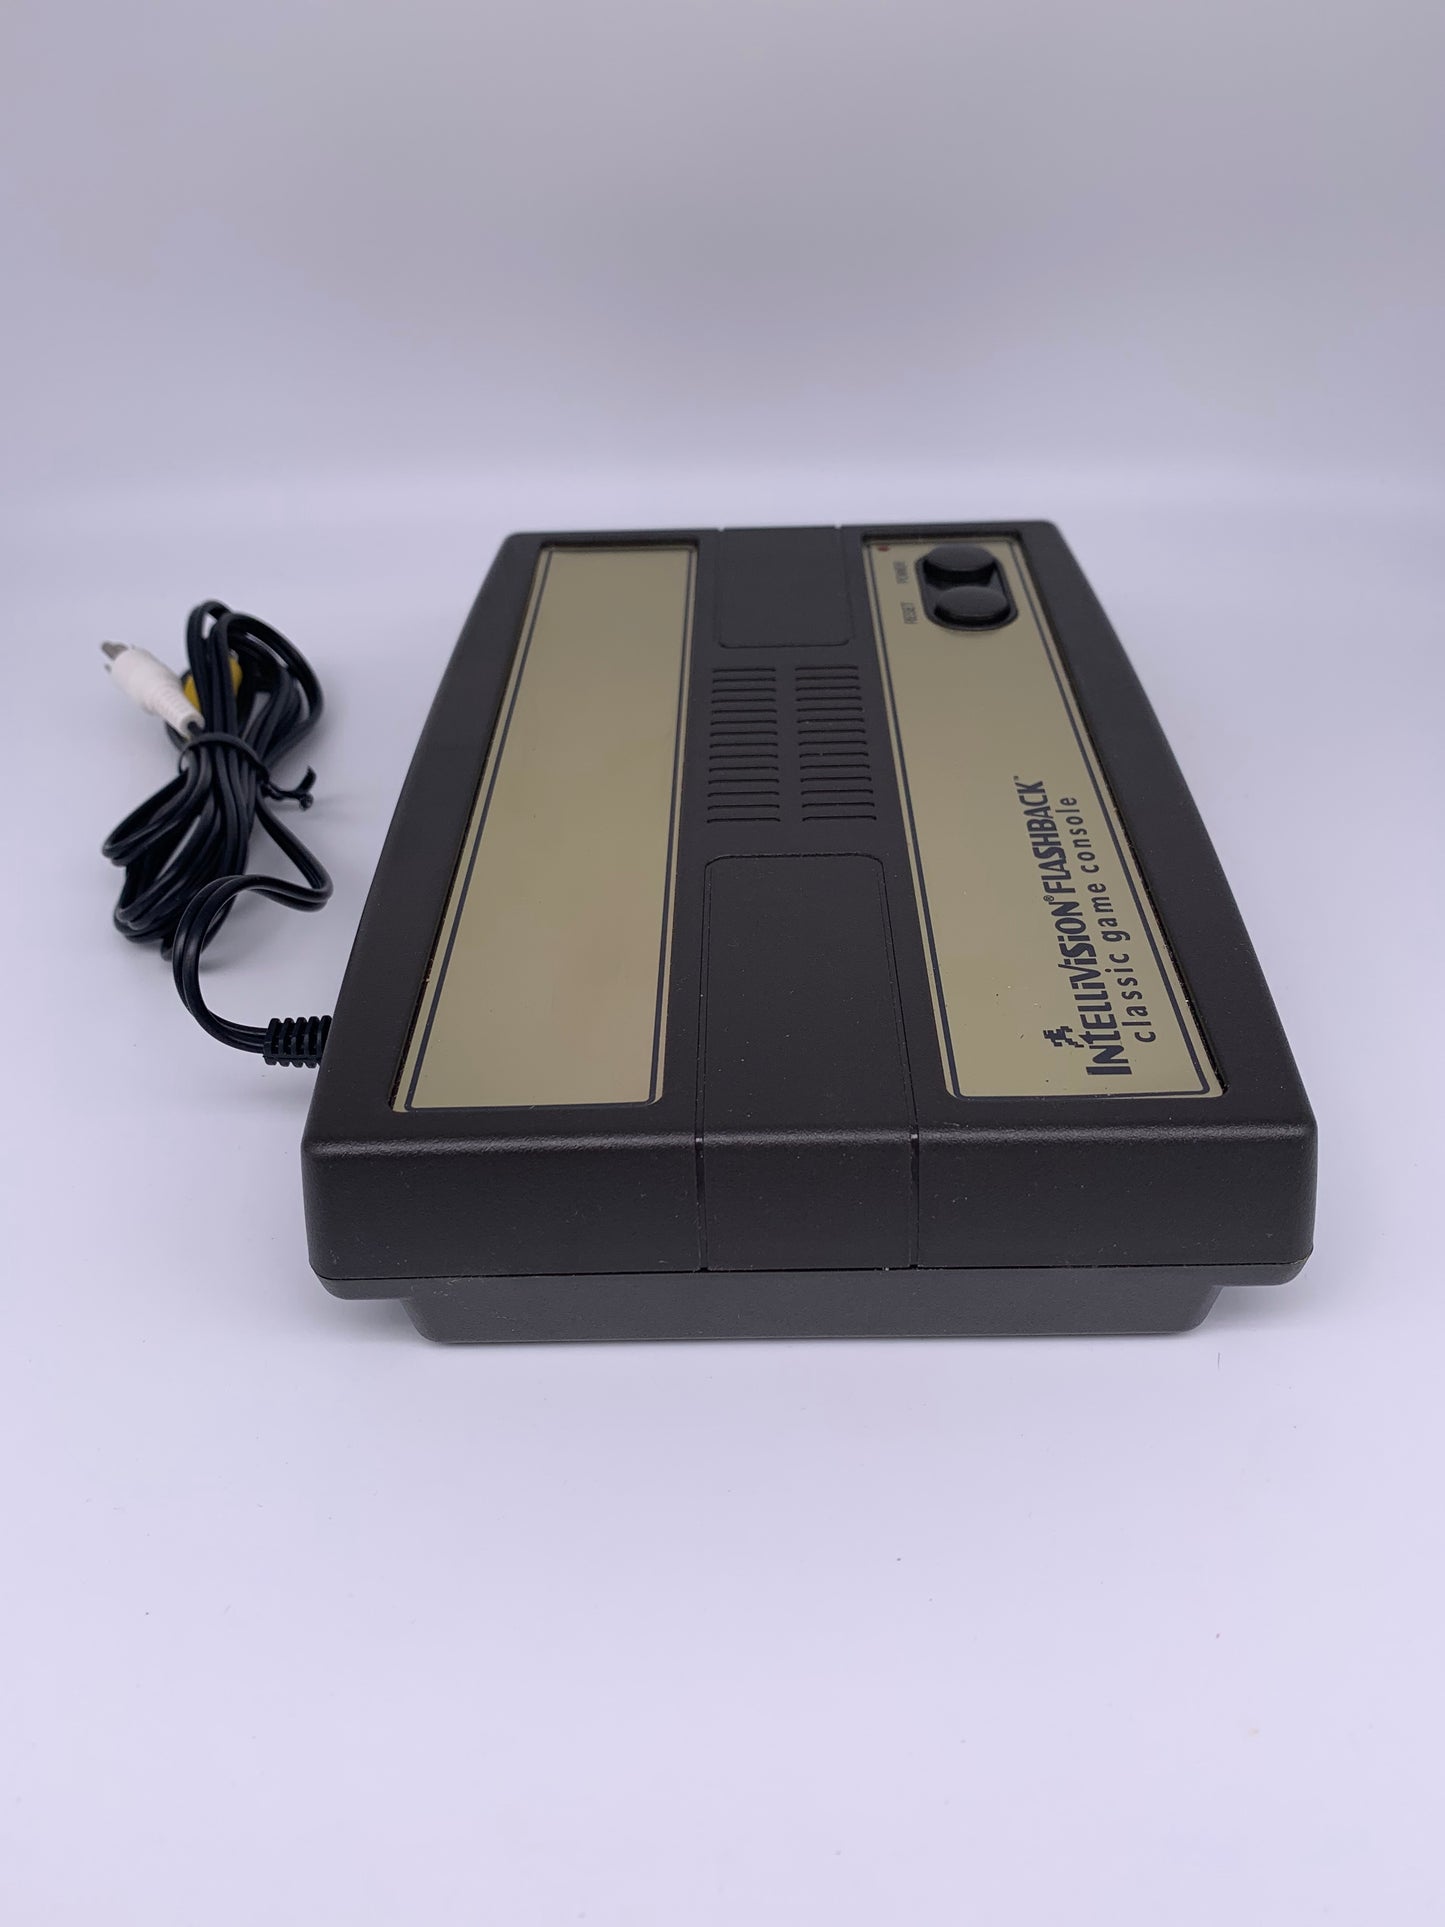 iNTELLiViSiON FLASHBACK CONSOLE | CLASSiC GAME | COLLECTORS EDiTiON